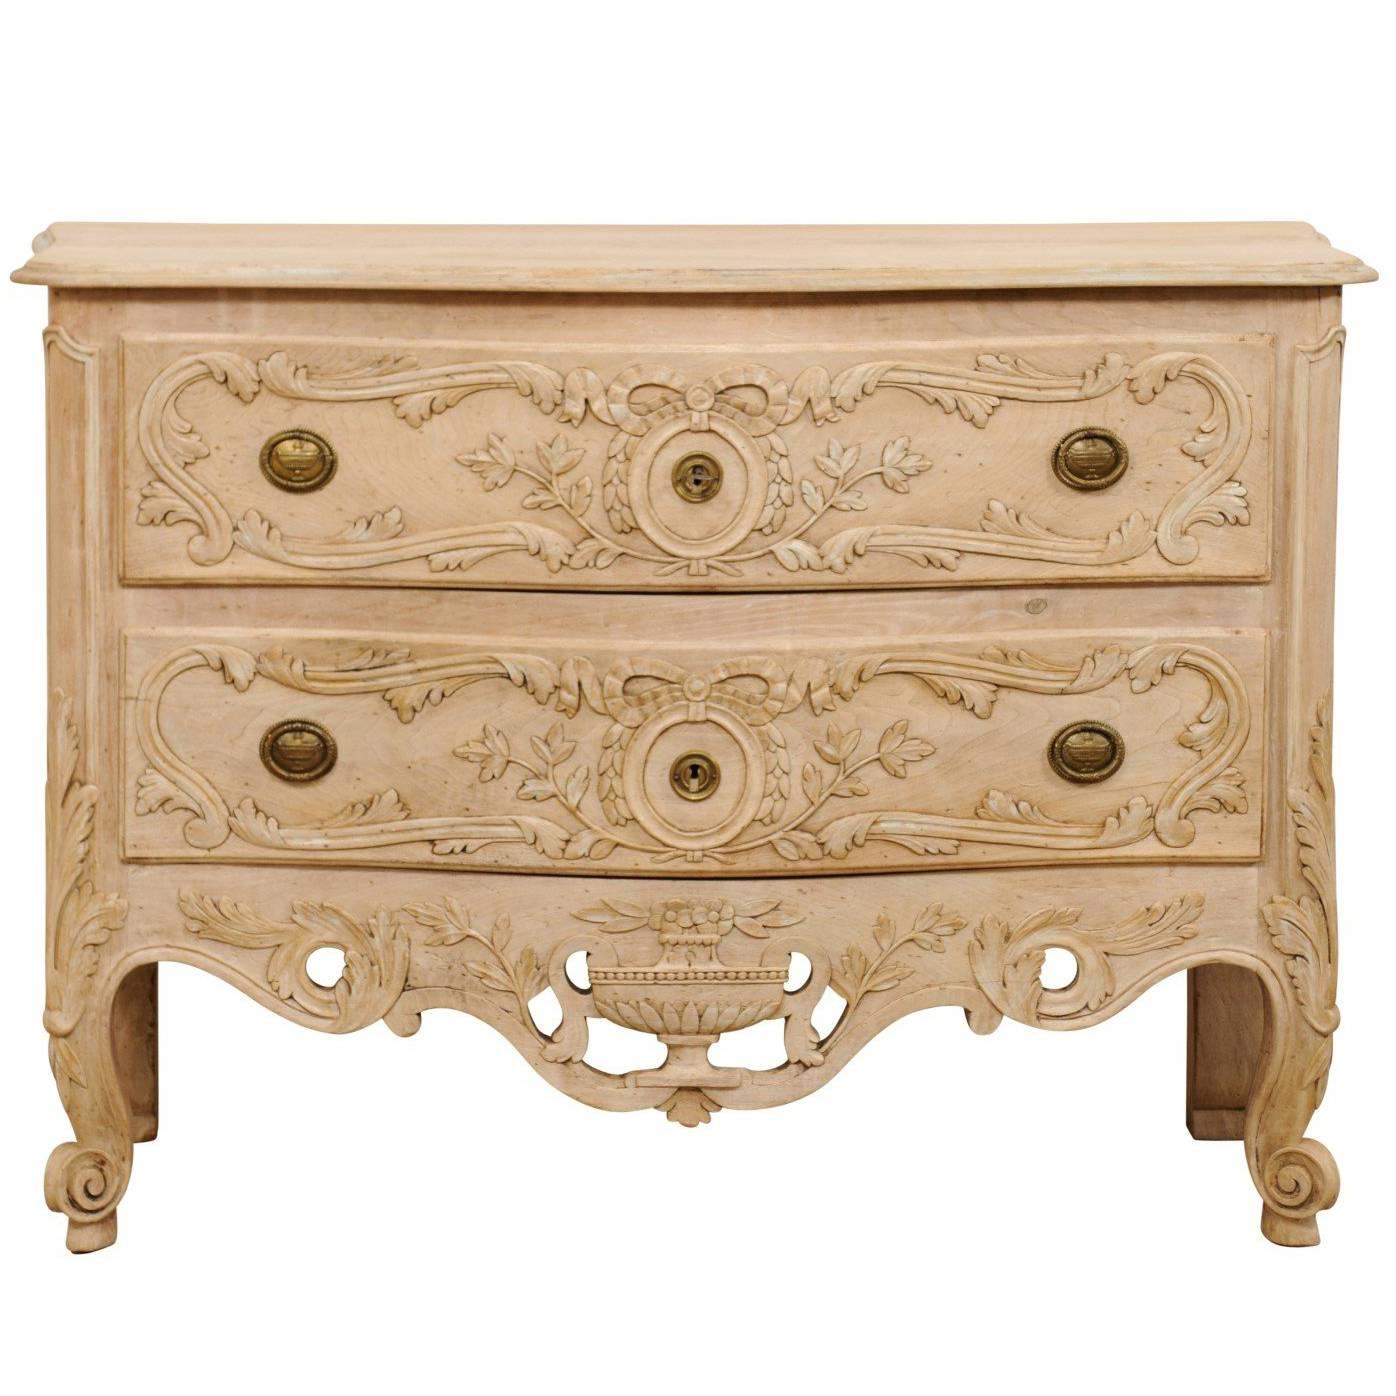 Exquisite Don Rousseau Mid-20th Century Richly Carved Ash Wood Chest of Drawers